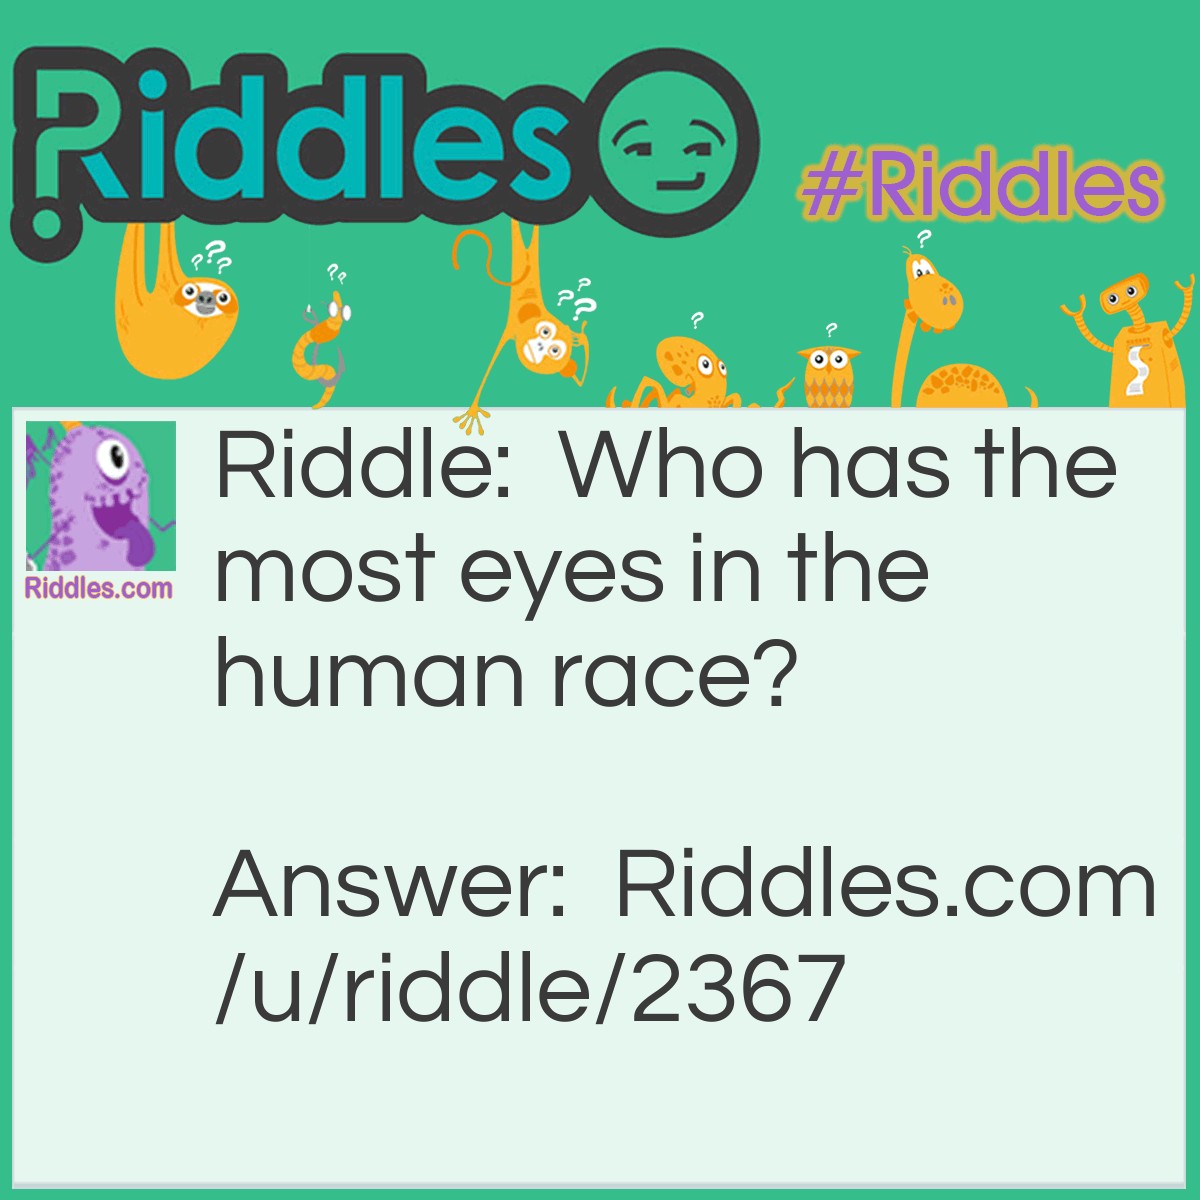 Riddle: Who has the most eyes in the human race? Answer: Moms. They have eyes behind their heads.